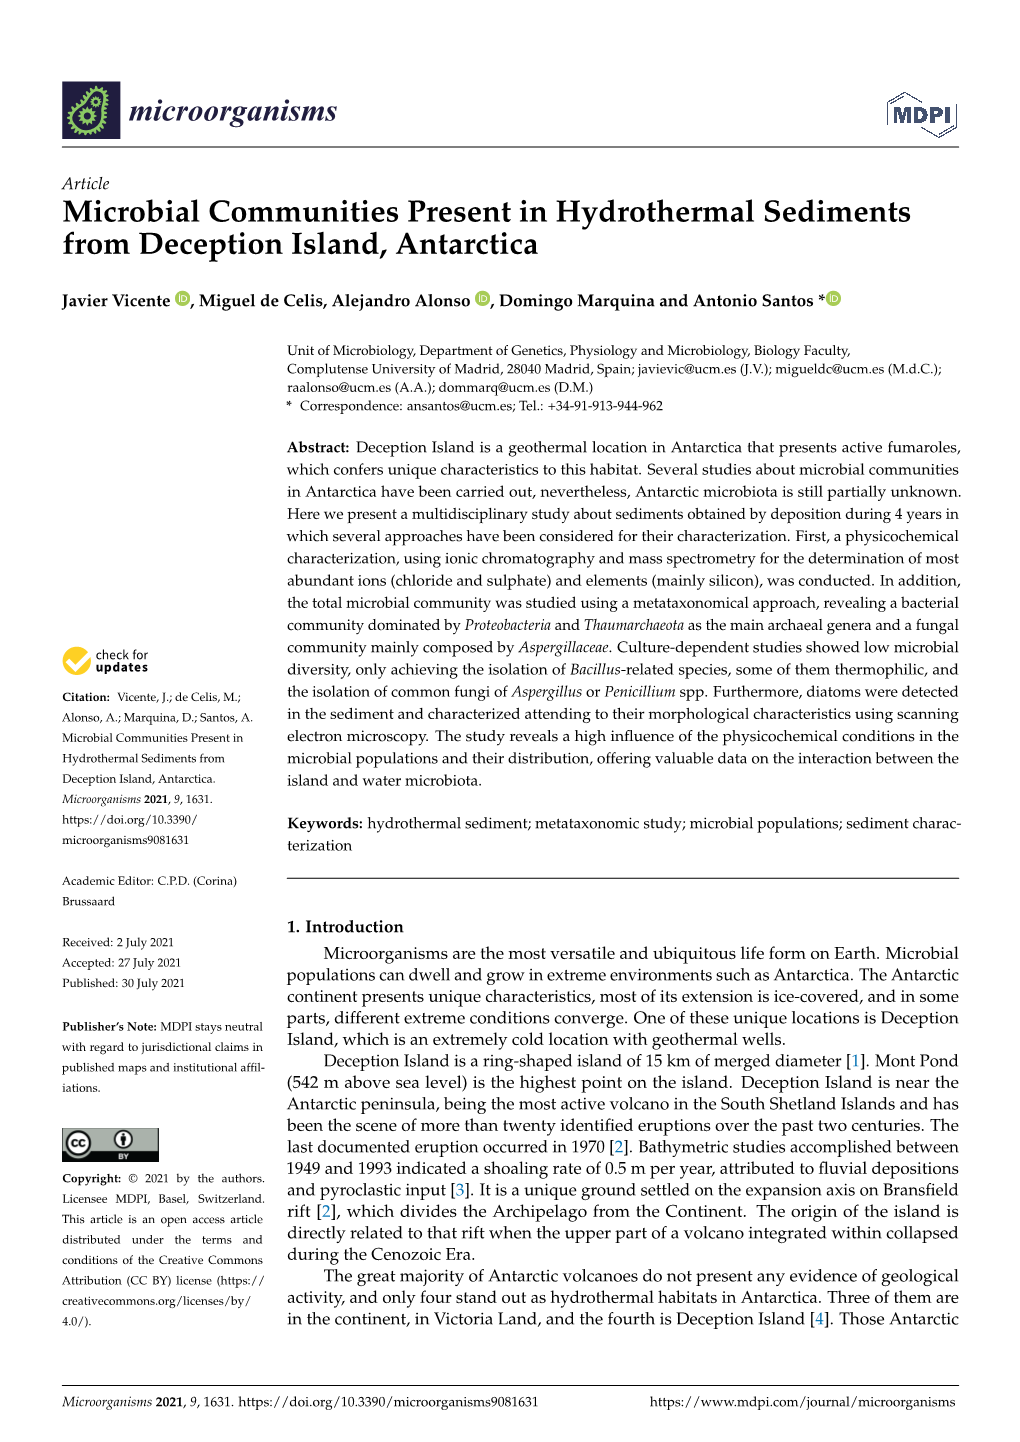 Microbial Communities Present in Hydrothermal Sediments from Deception Island, Antarctica